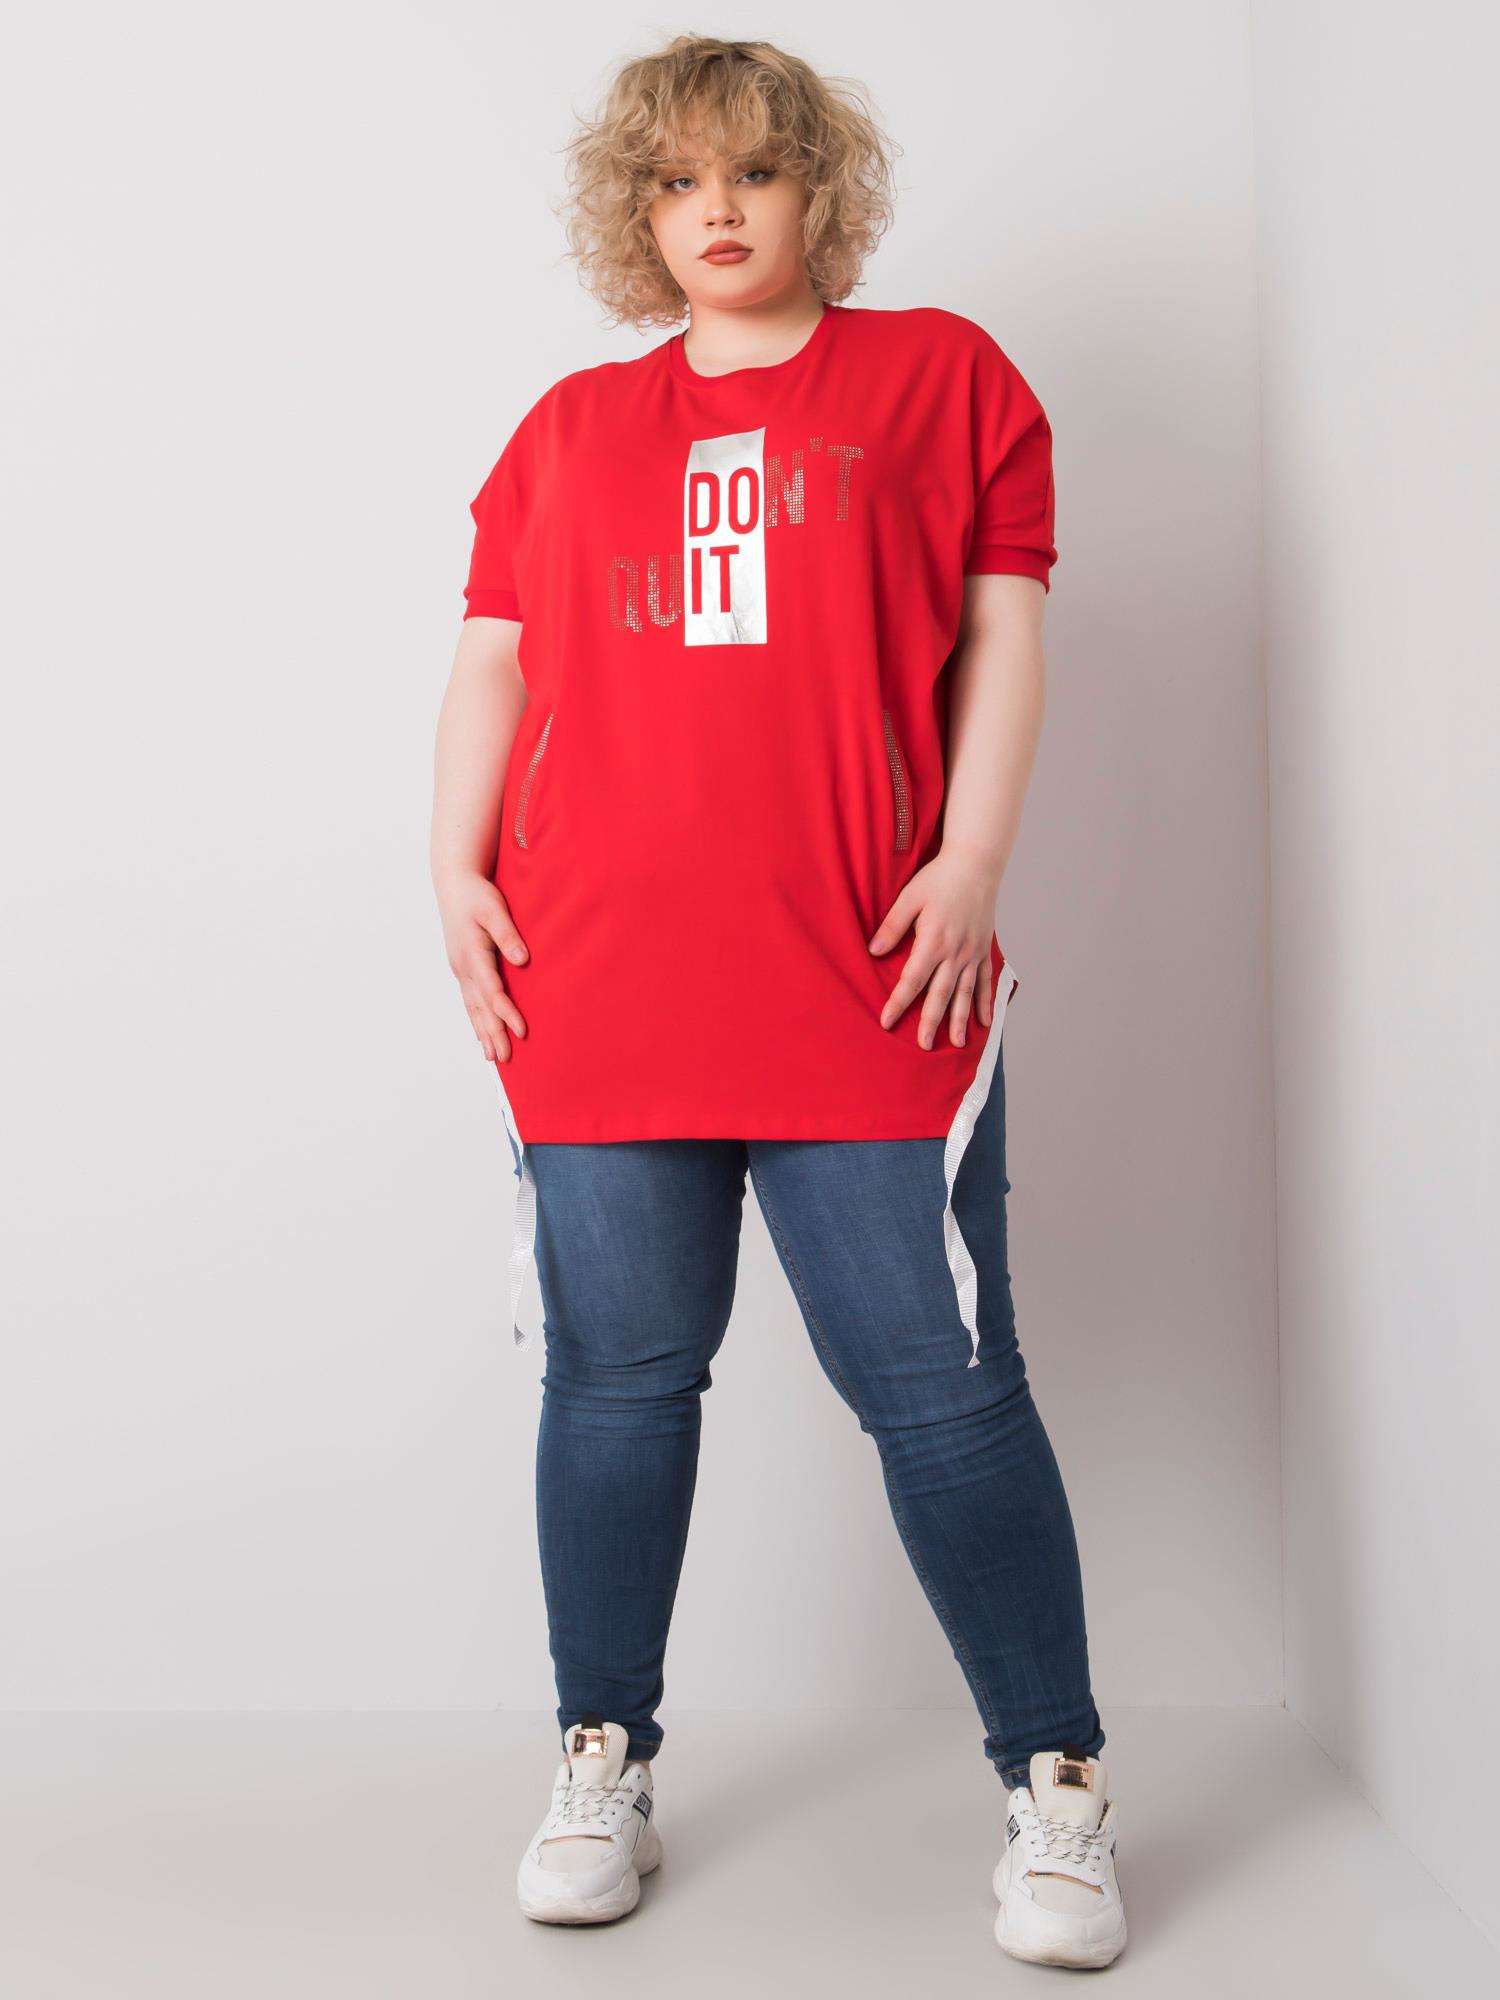 Red Blouse Plus Sizes With Inscription